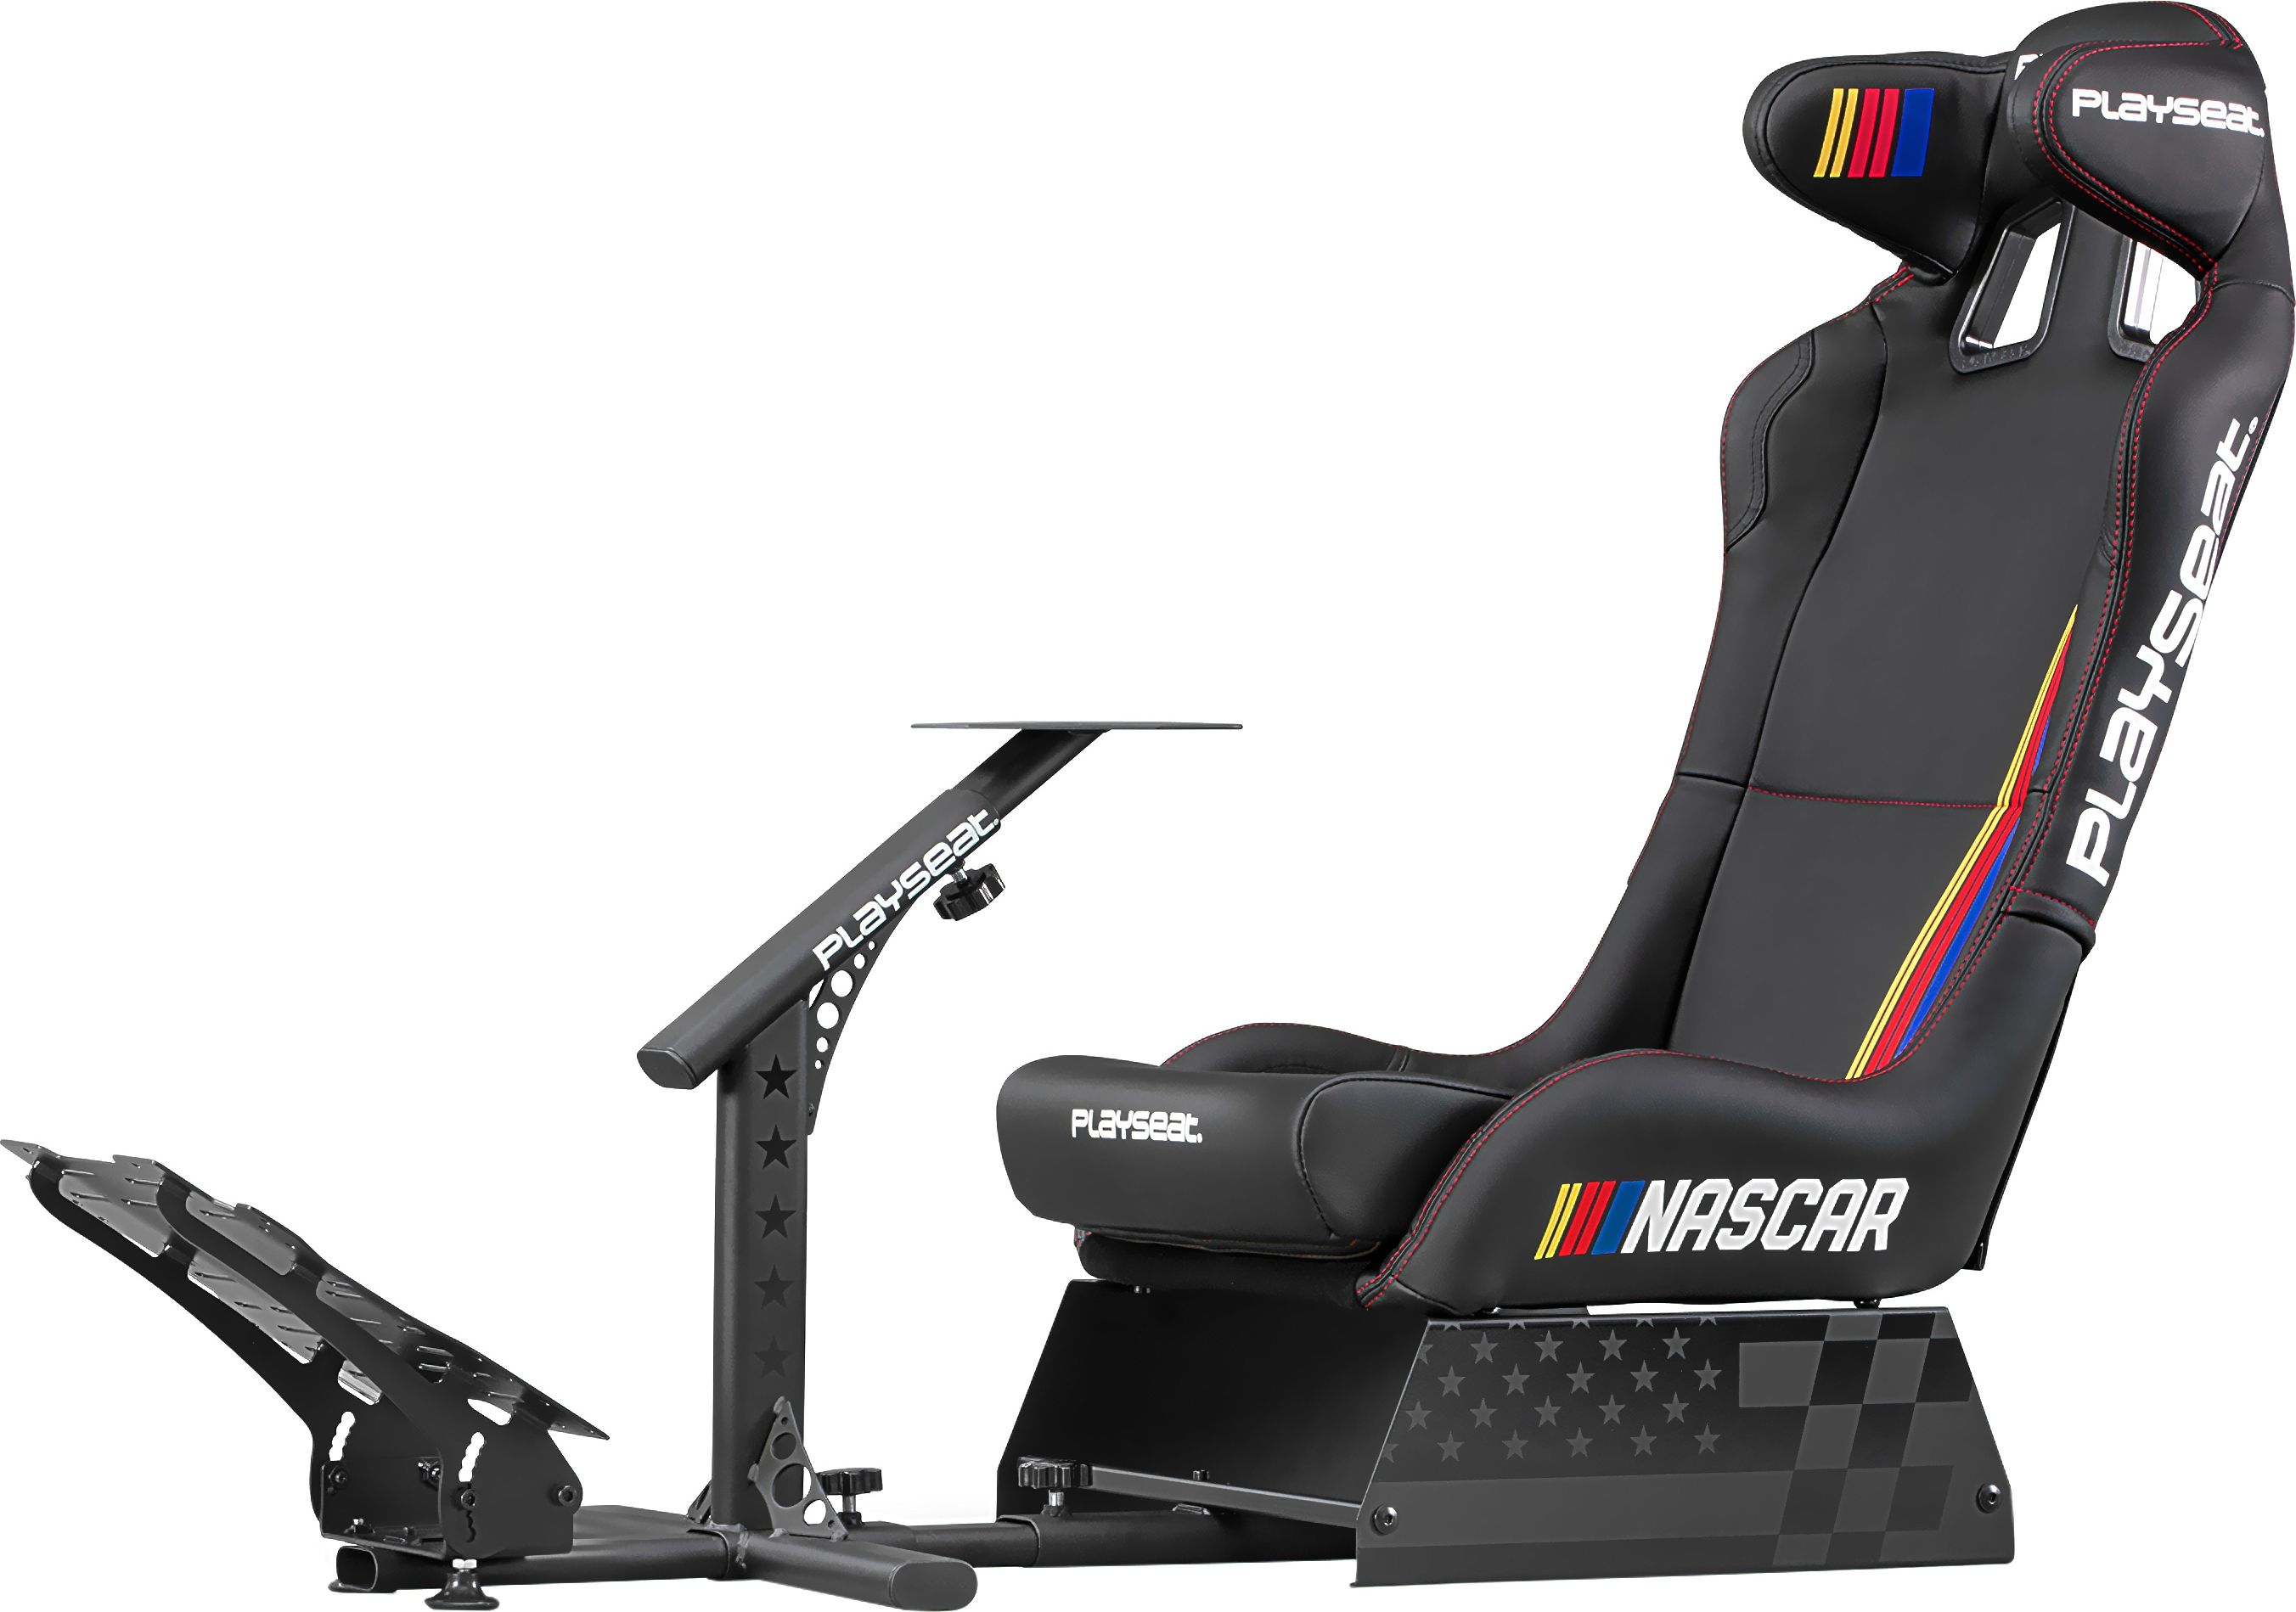 Playseat Evolution PRO - NASCAR Limited Edition Gaming Chair - Black Black